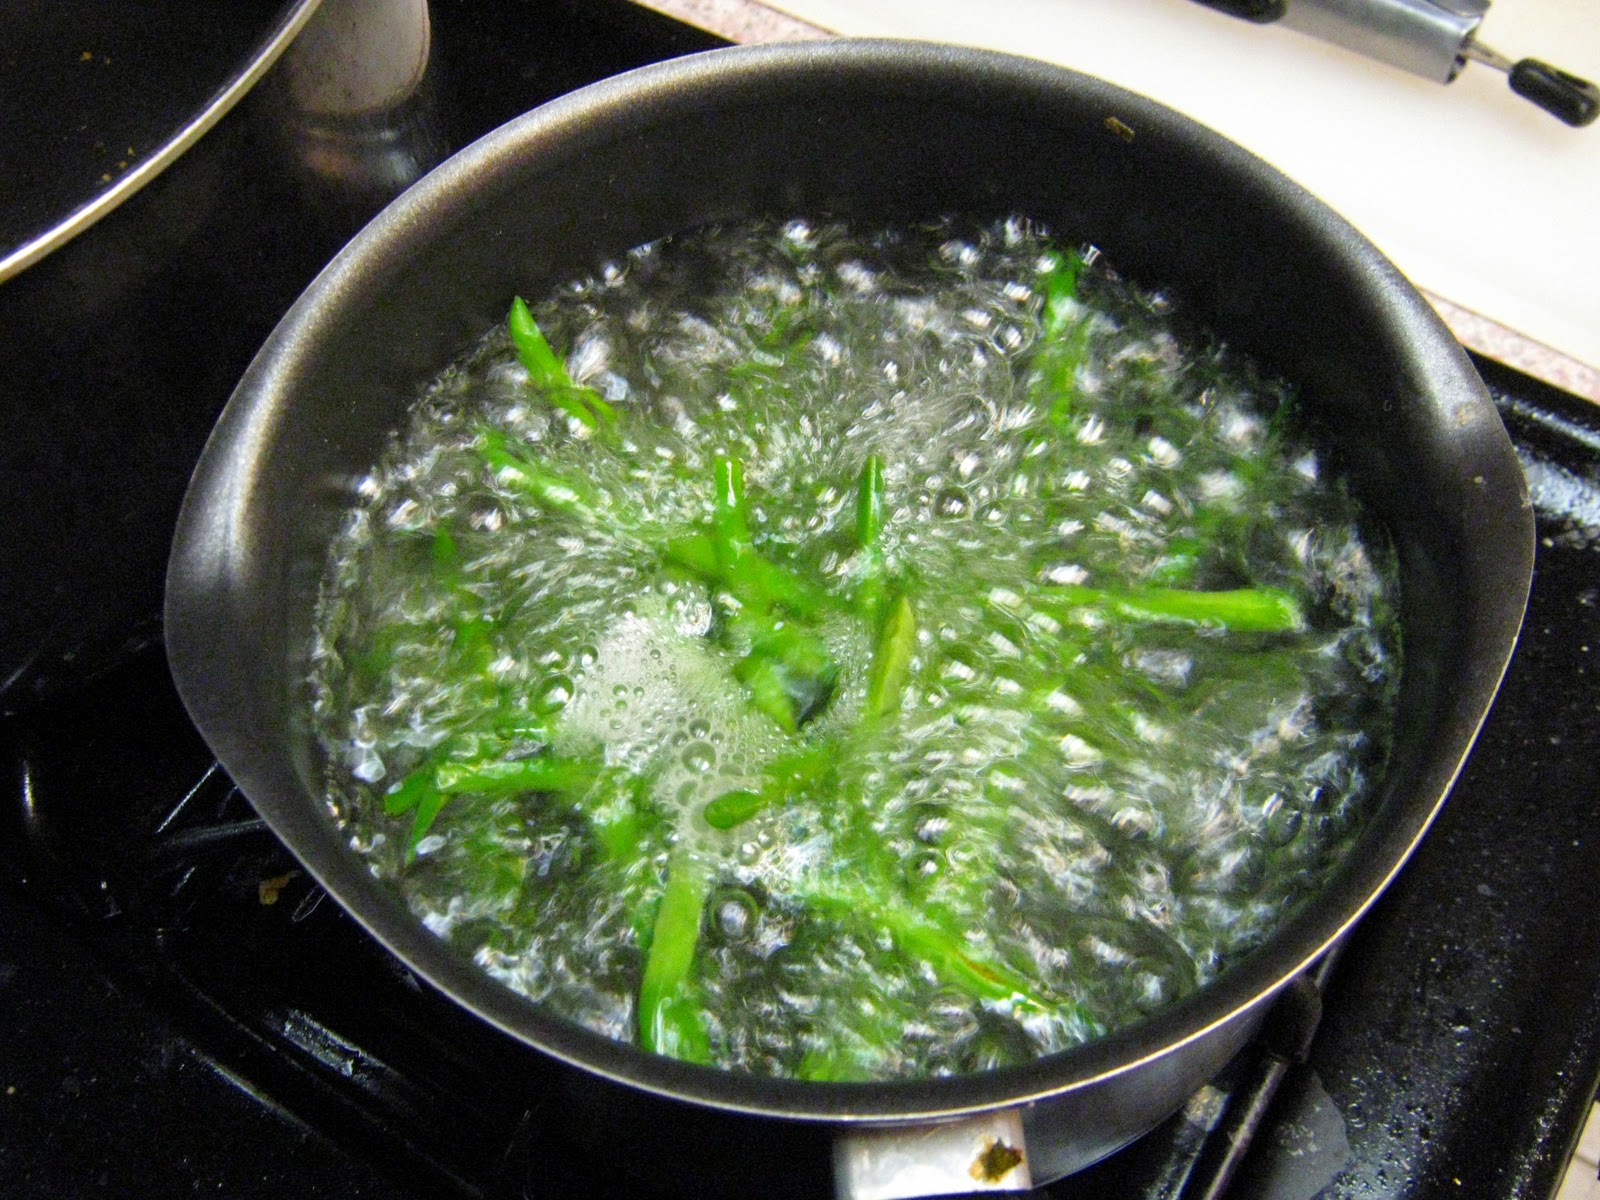 How to Blanch Vegetables